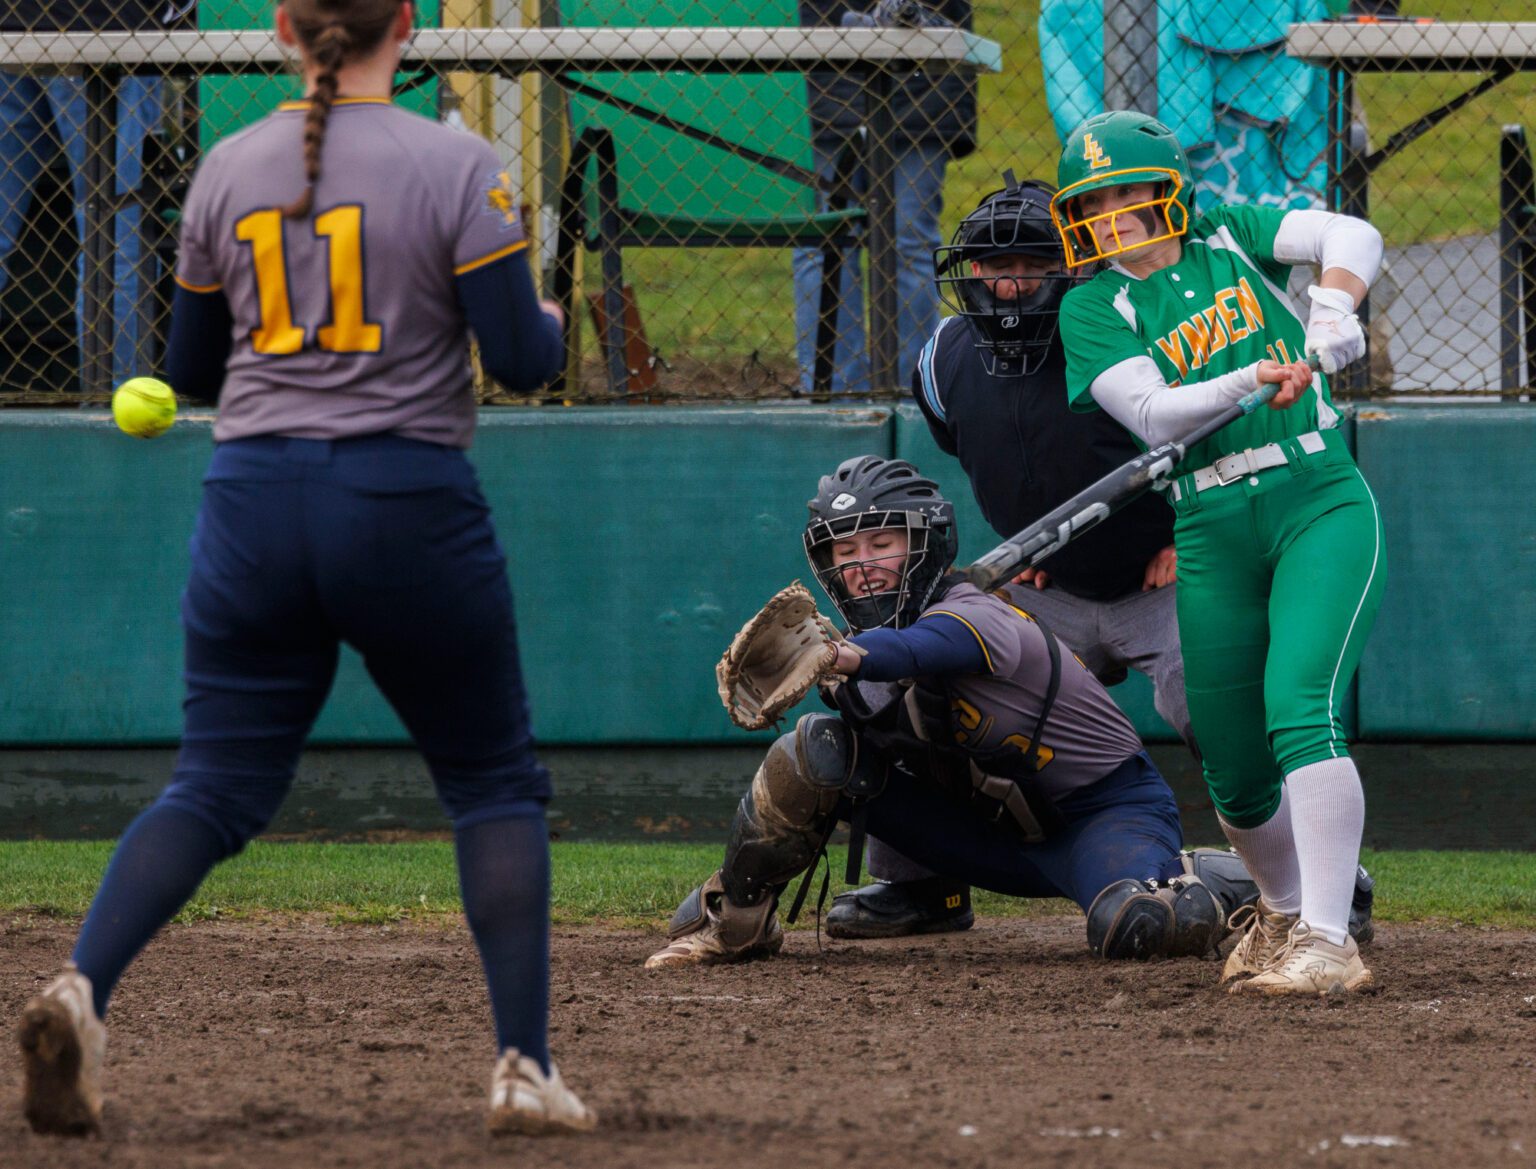 Lynden's Campbell DeJong drives in a run Thursday, March 28 during the Lions' 10-7 win over Ferndale at Lynden High School.